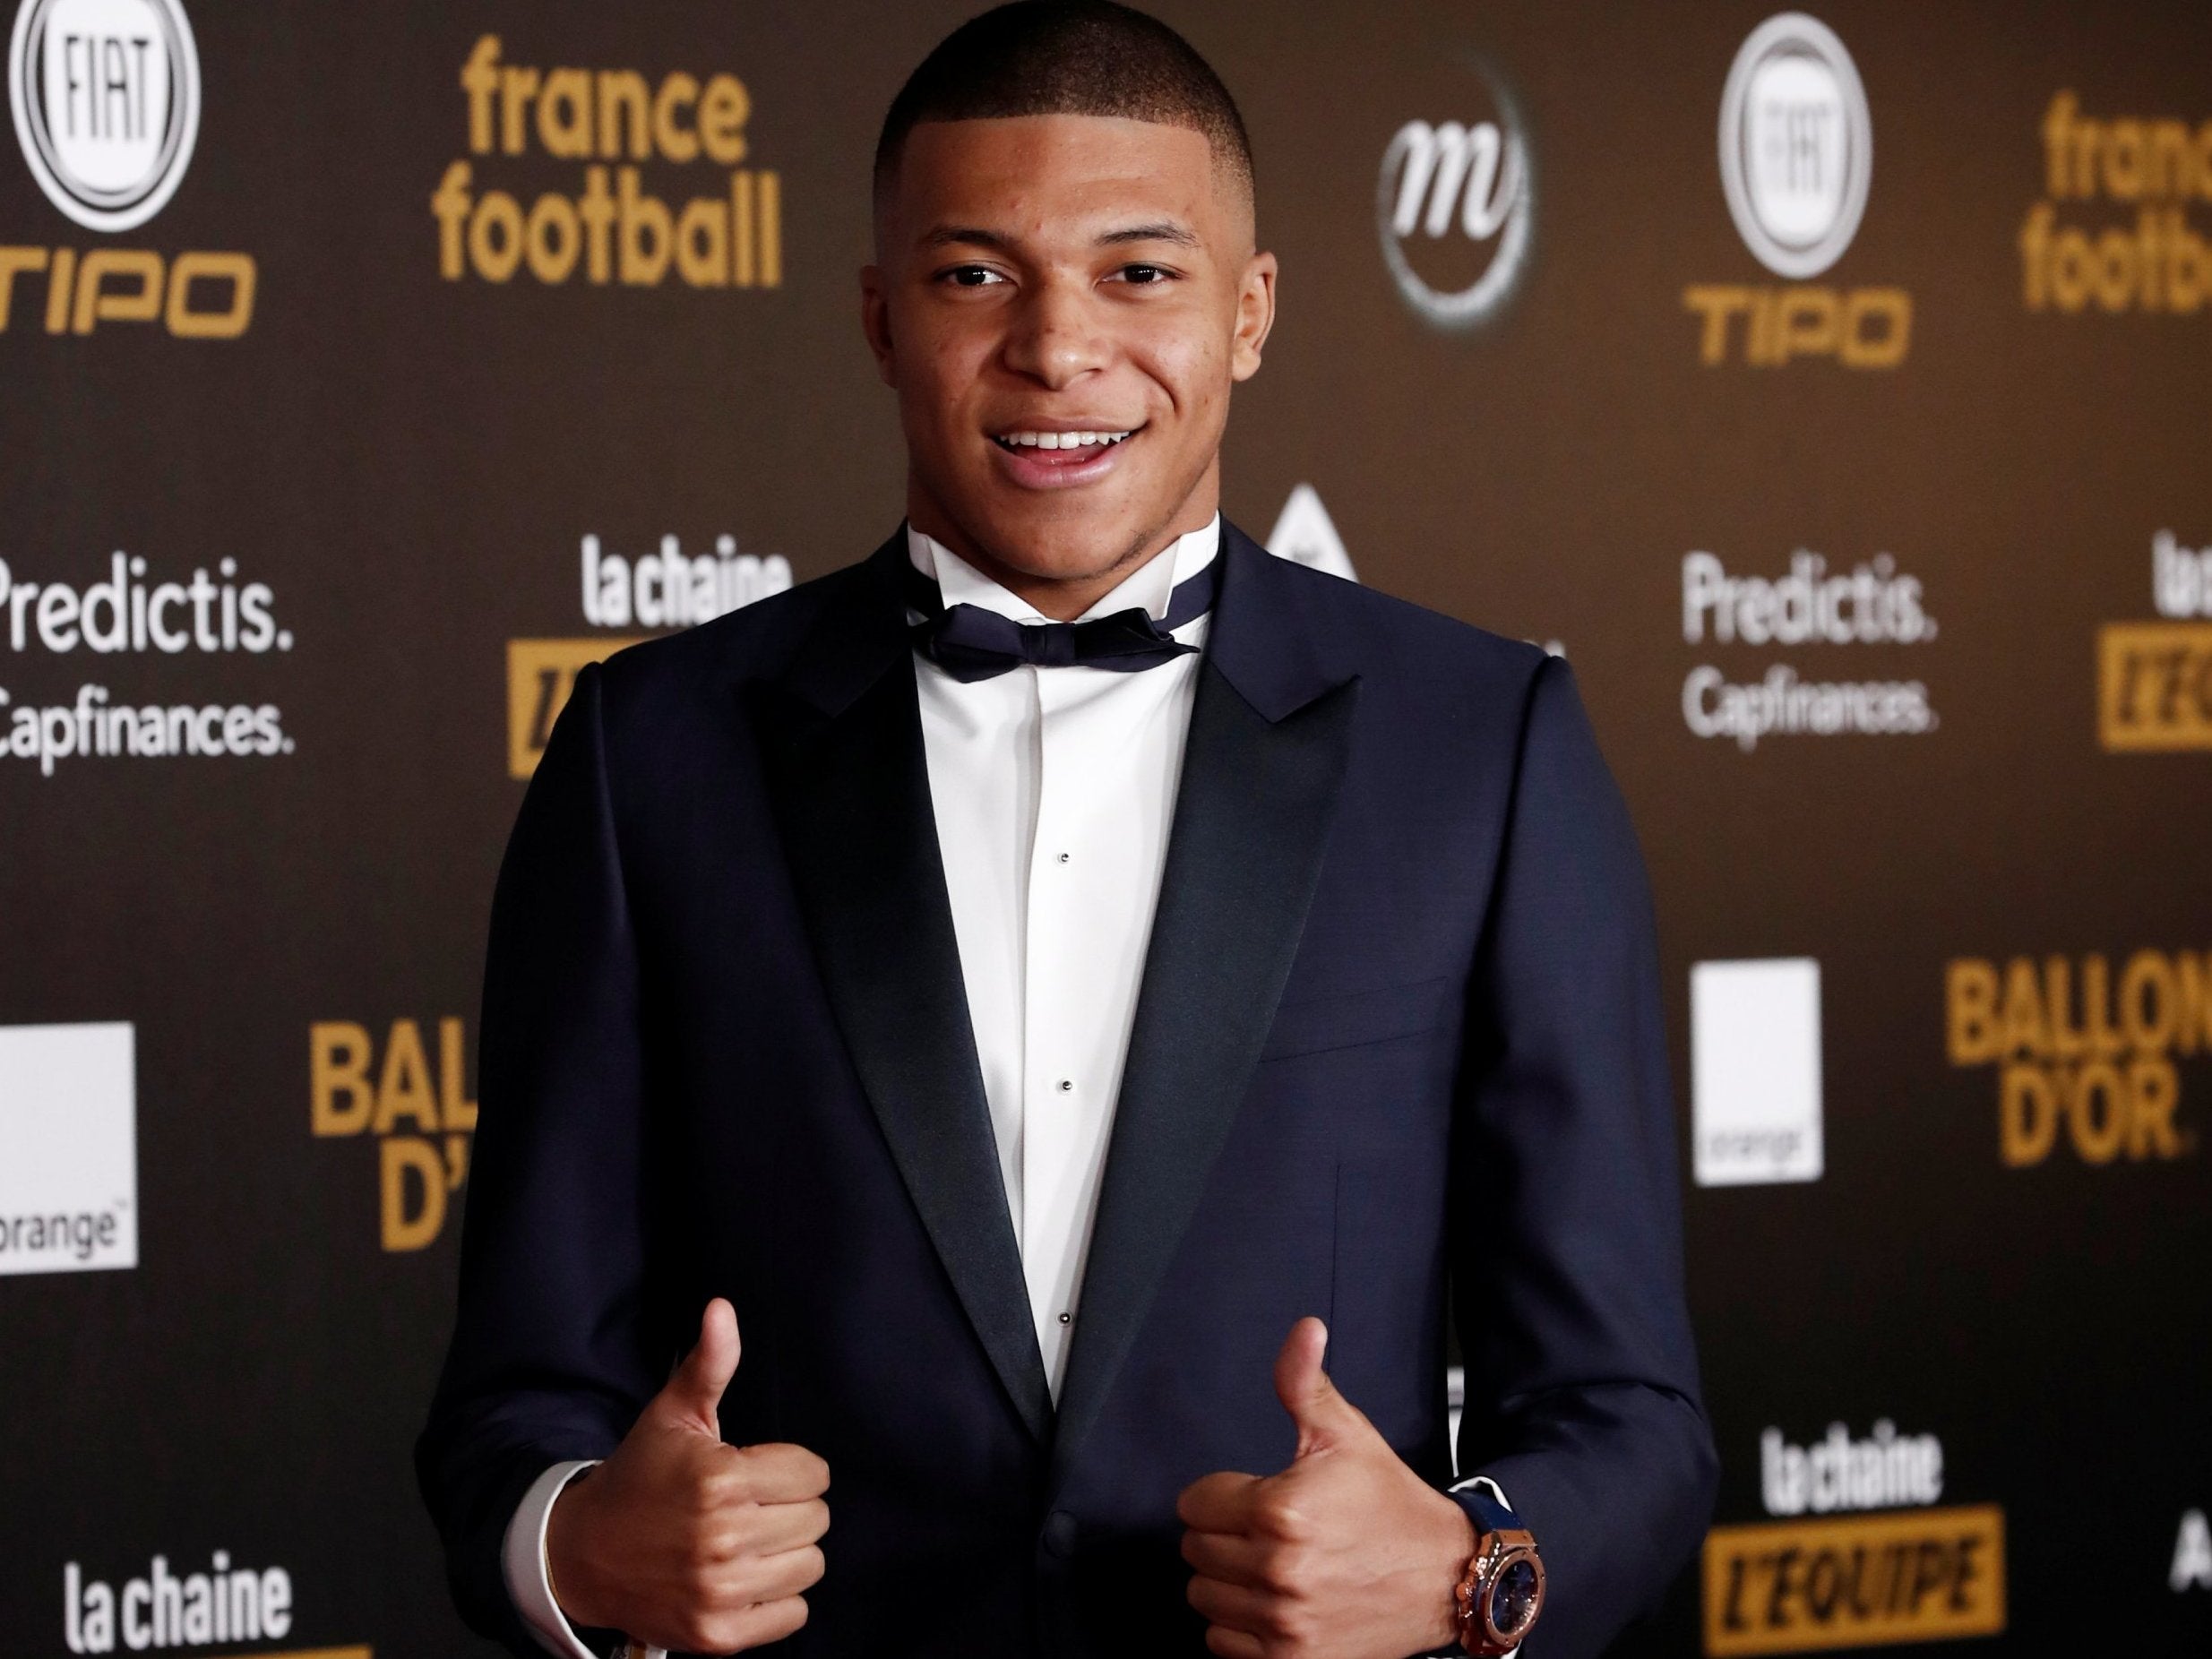 Kylian Mbappe was close to joining Arsenal